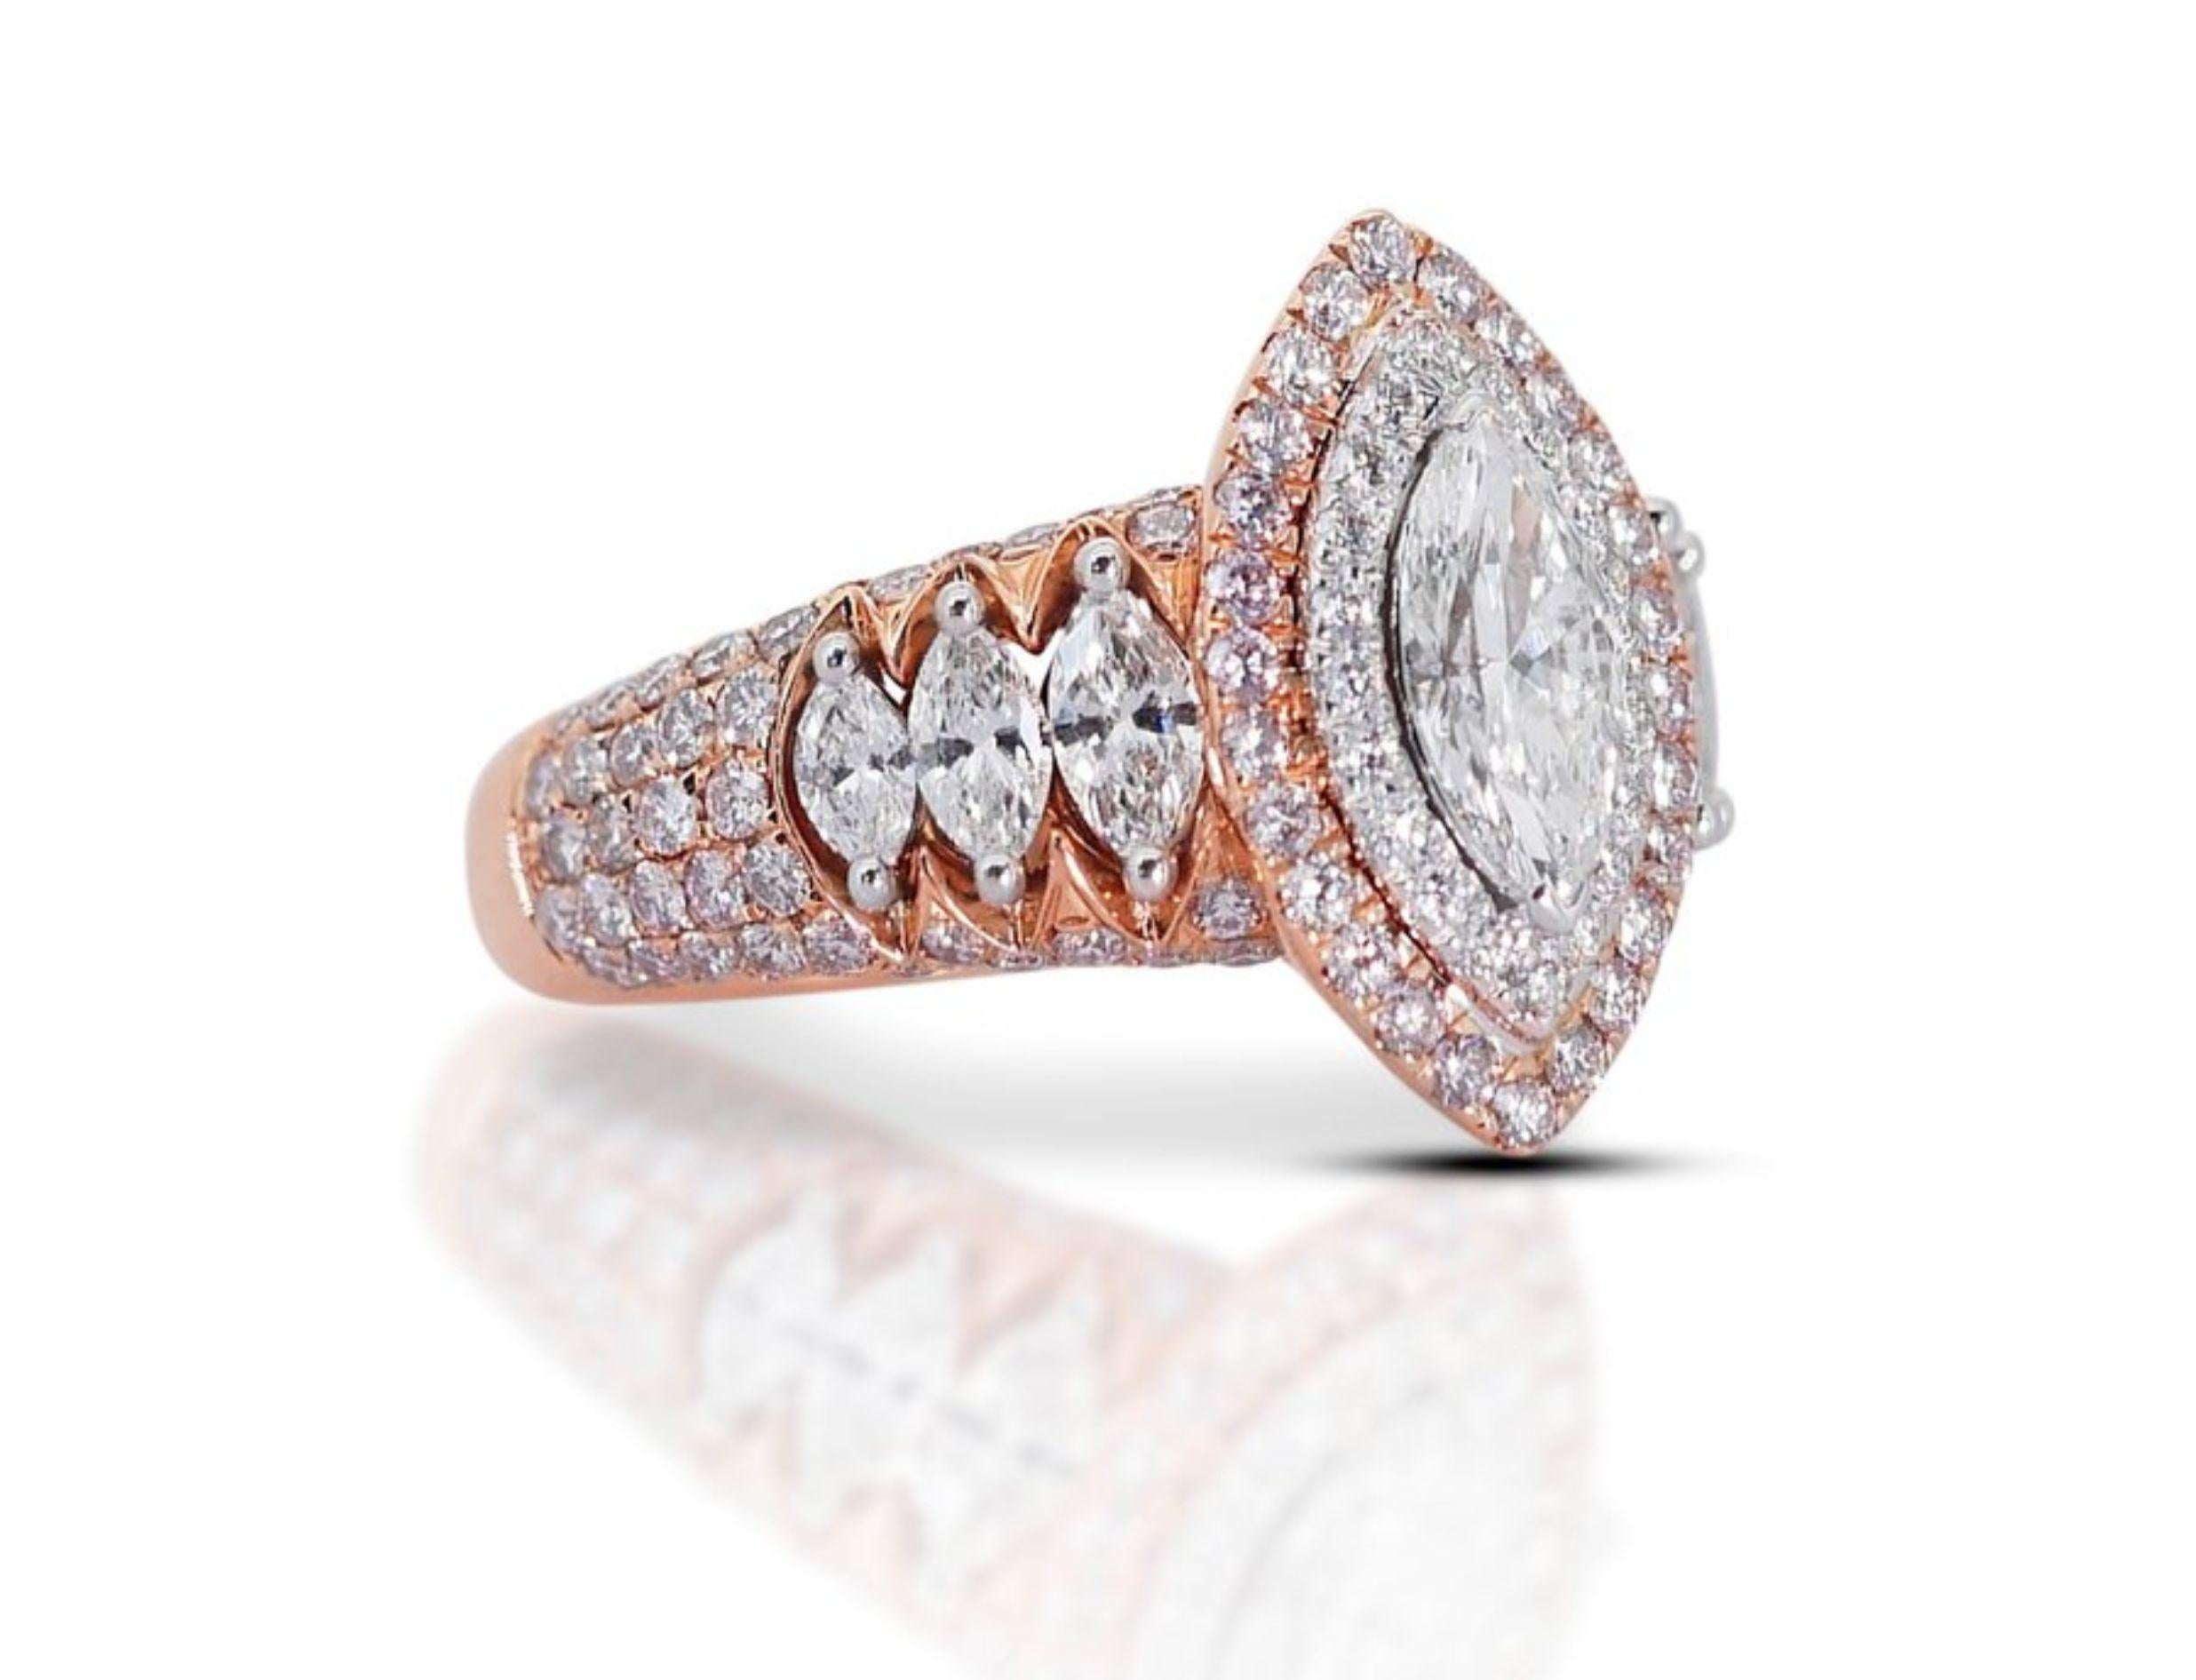 Breathtaking 0.70ct Marquise Diamond Ring in 18K Rose Gold 5